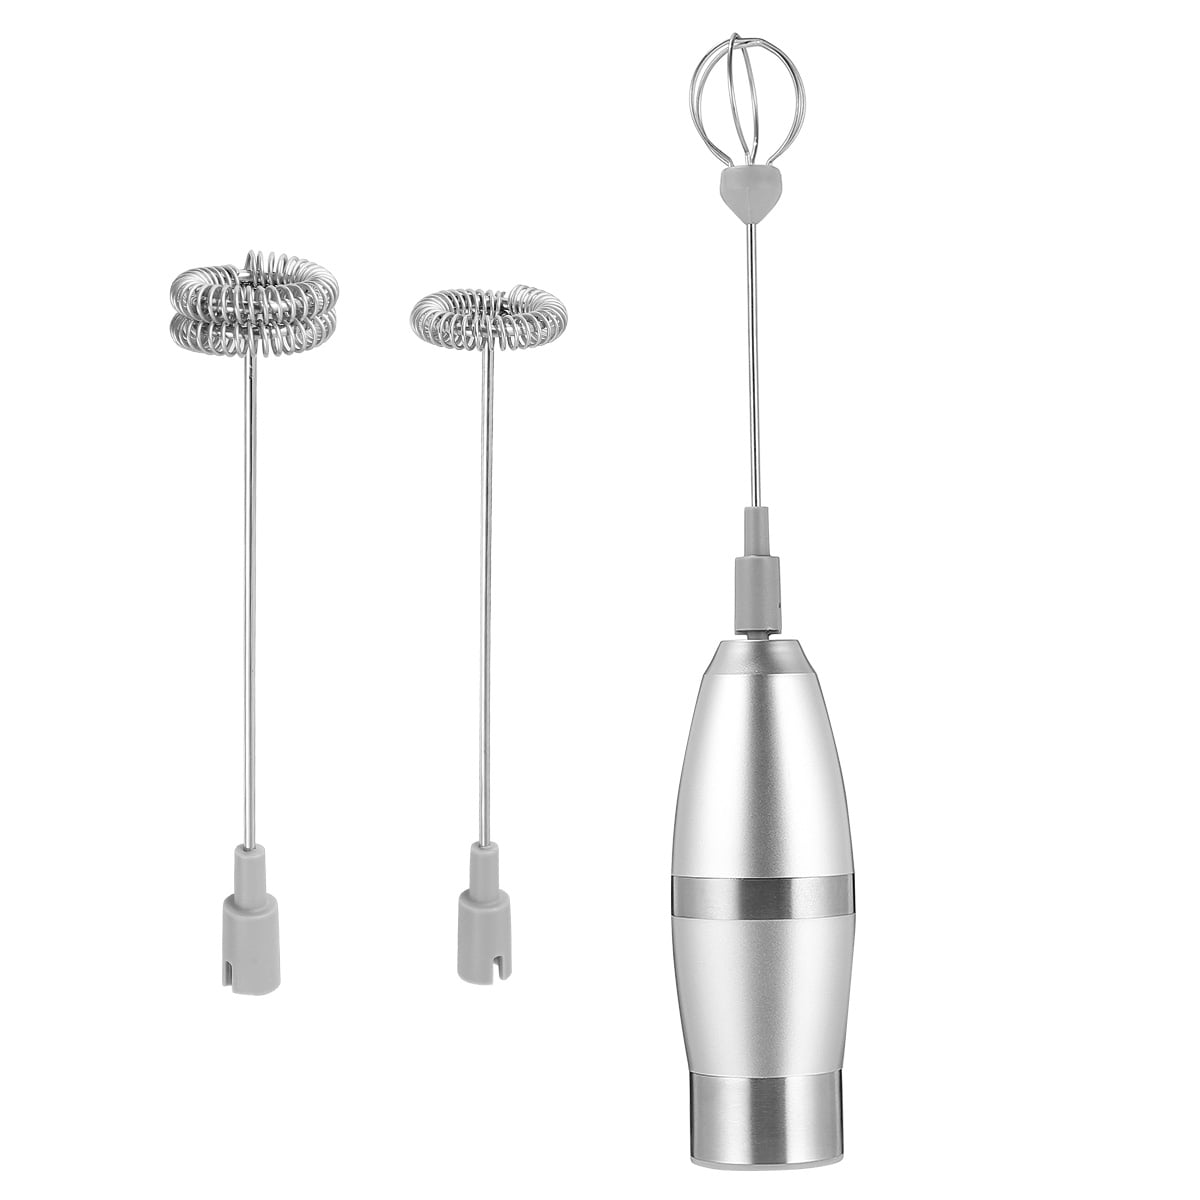 Milk Frother Electric – Nouxra